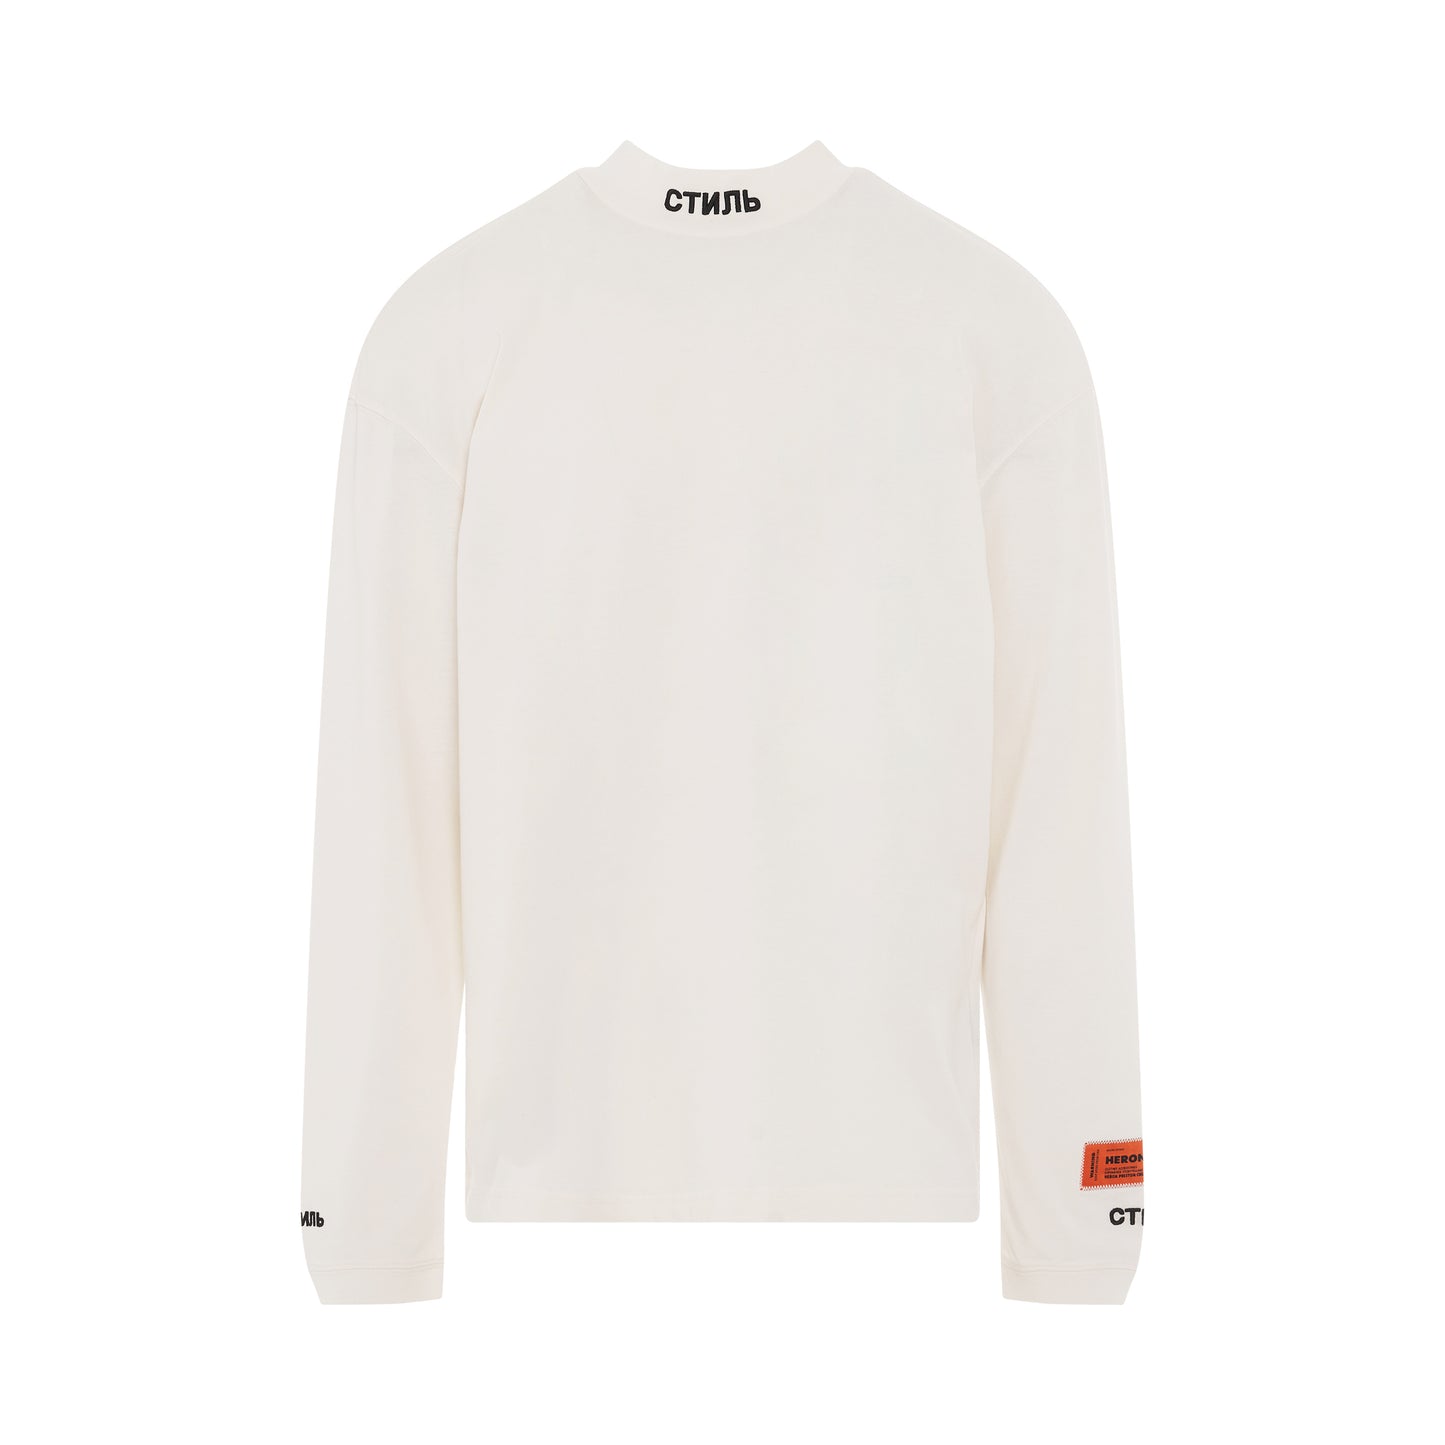 CTNMB Long Sleeve Turtleneck in White